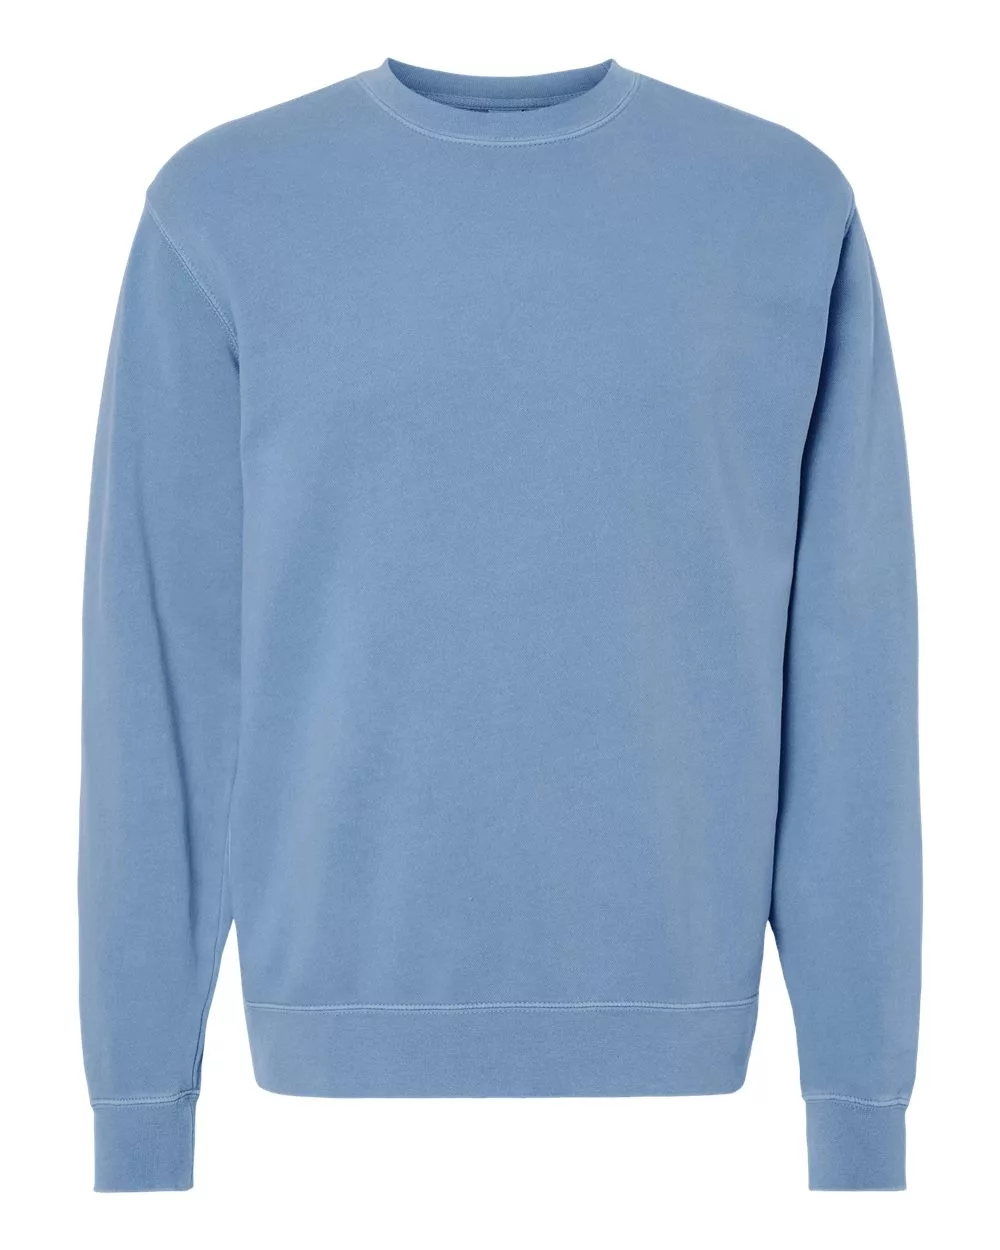 Independent Trading Co. PRM3500 Heavyweight Pigment-Dyed Crewneck Sweatshirt  